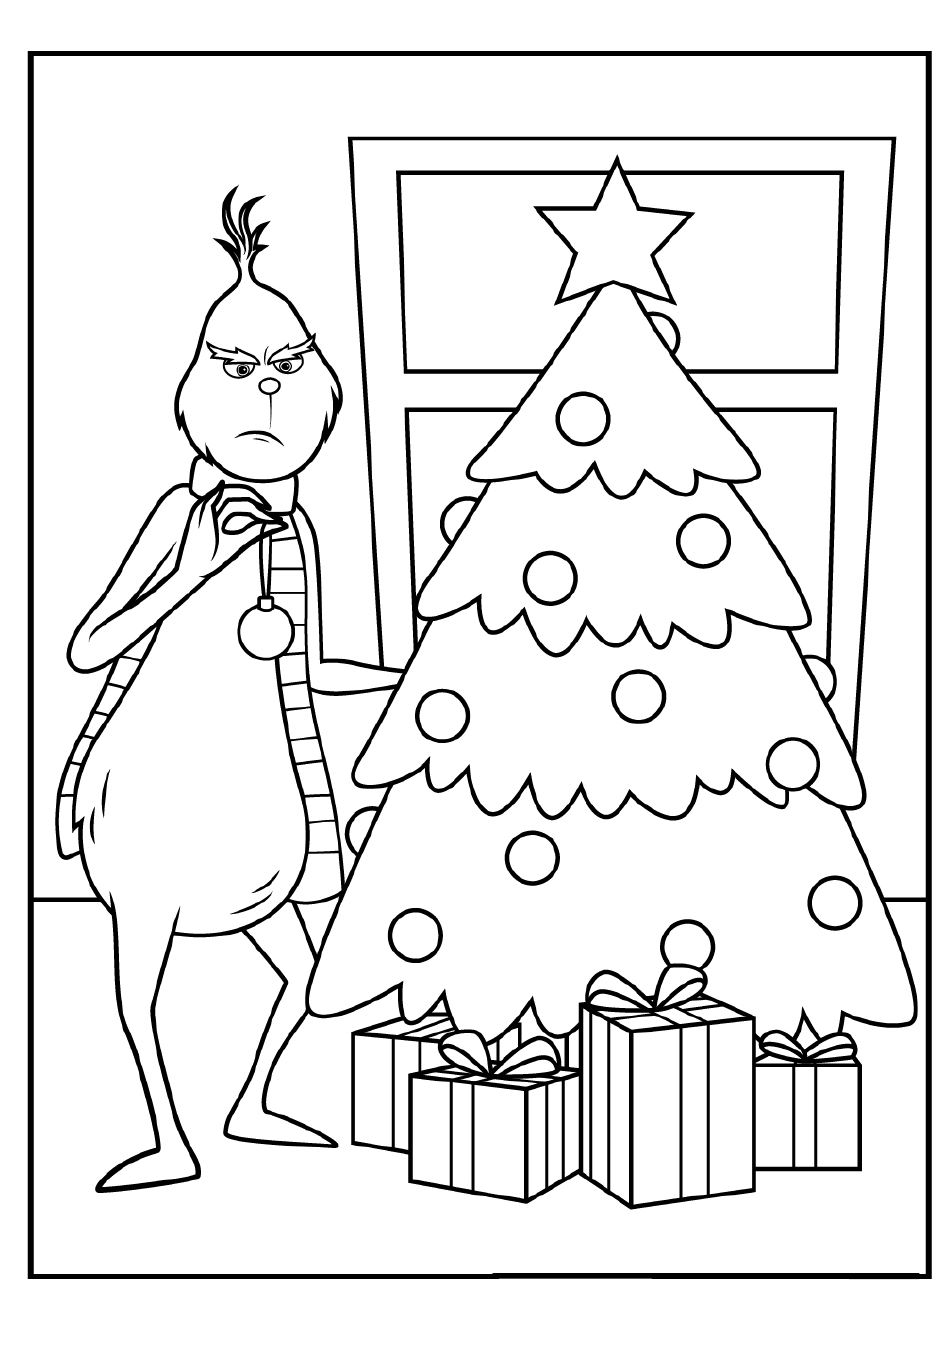 Grinch Coloring Pages - A Fun and Festive Activity for Kids